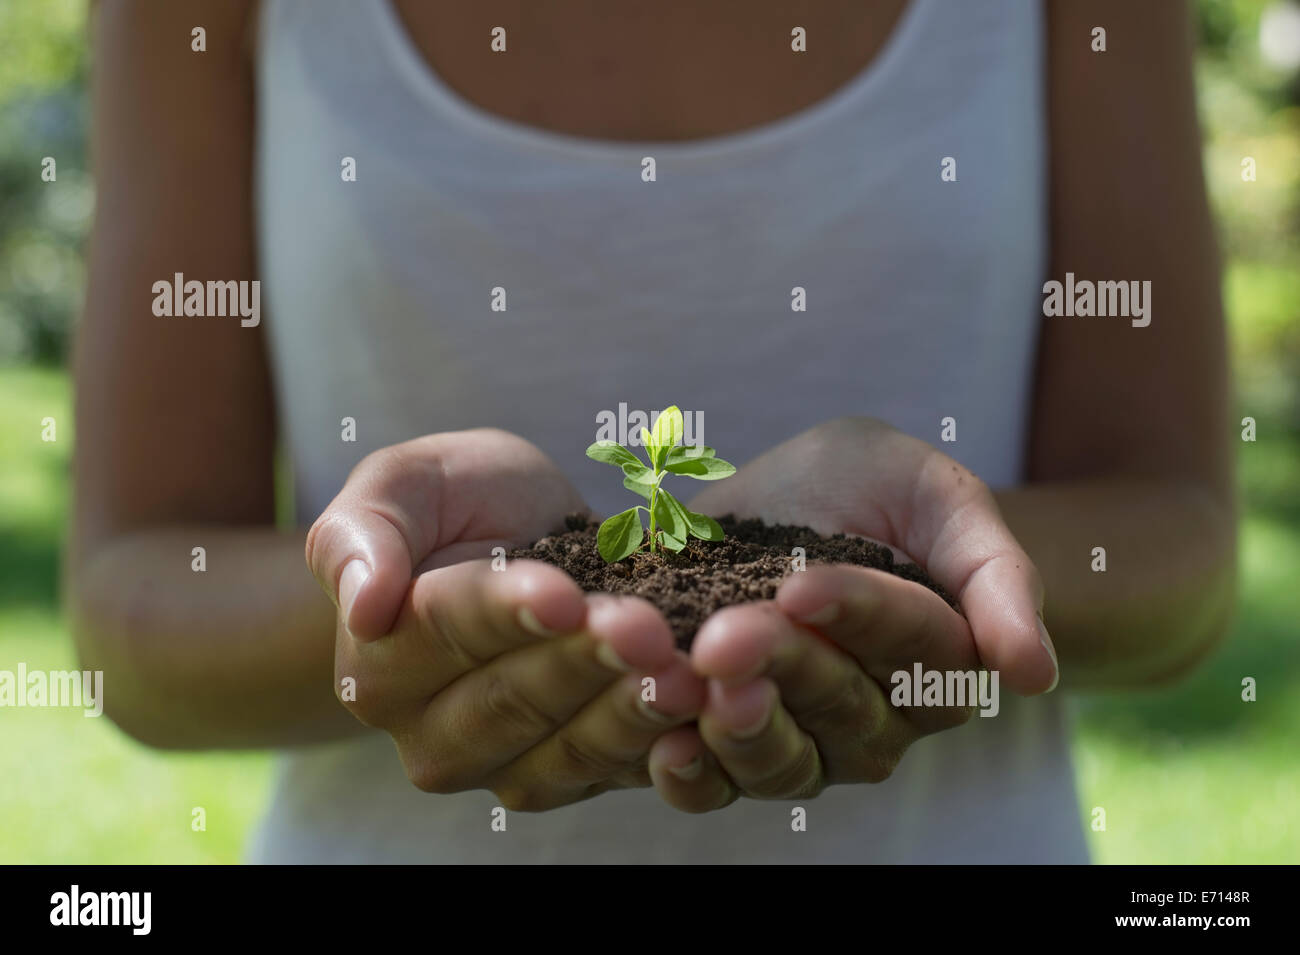 Germany, Human hands holding seedling Stock Photo